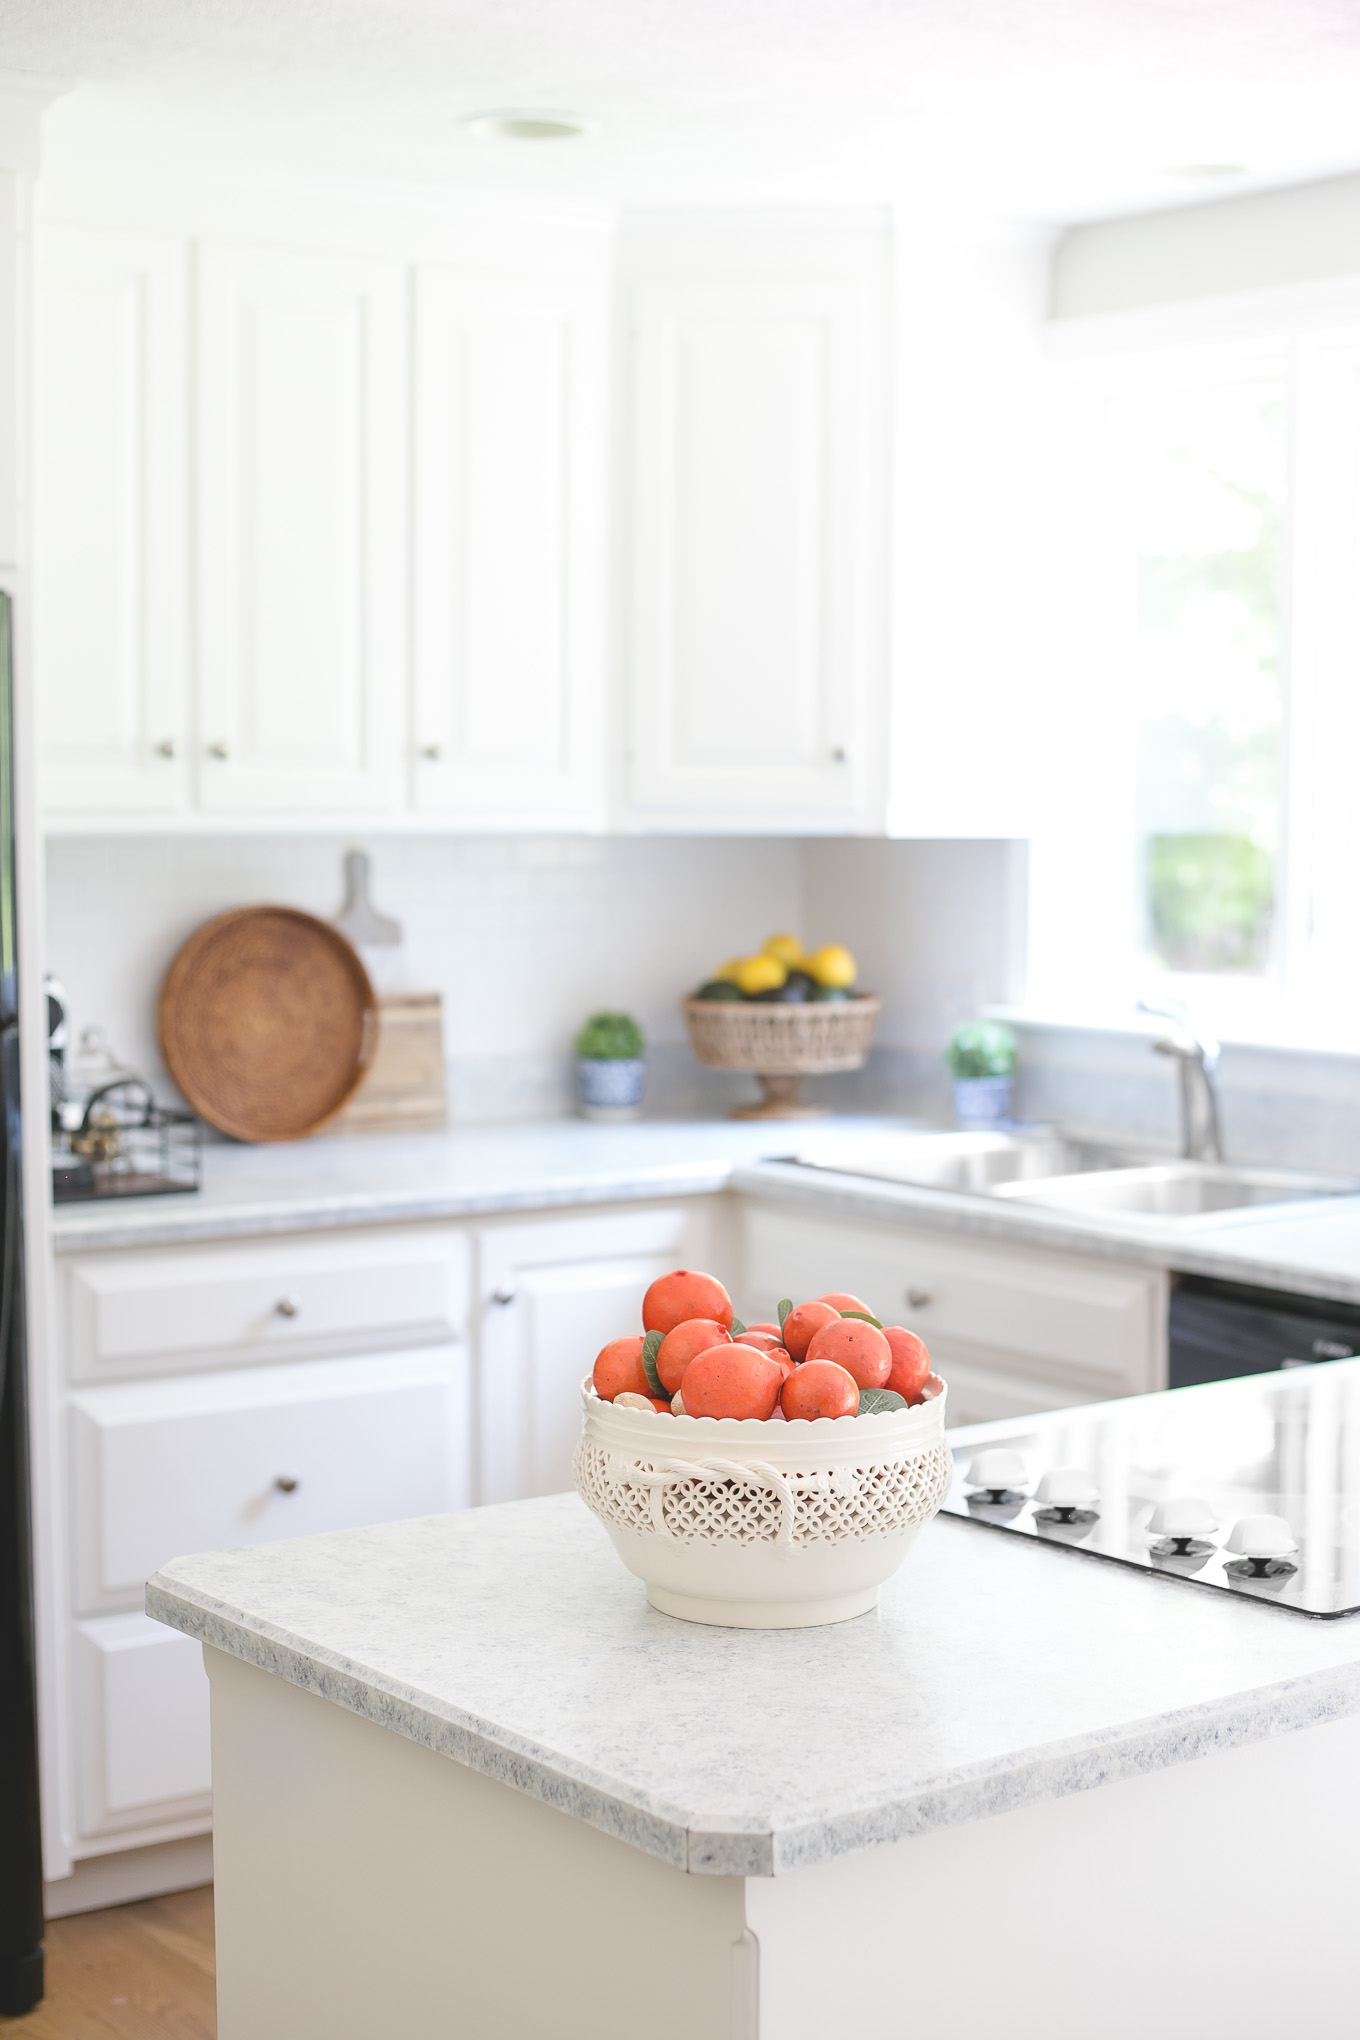 How I Painted My Kitchen Countertops, How To Paint Countertops Look Like Granite